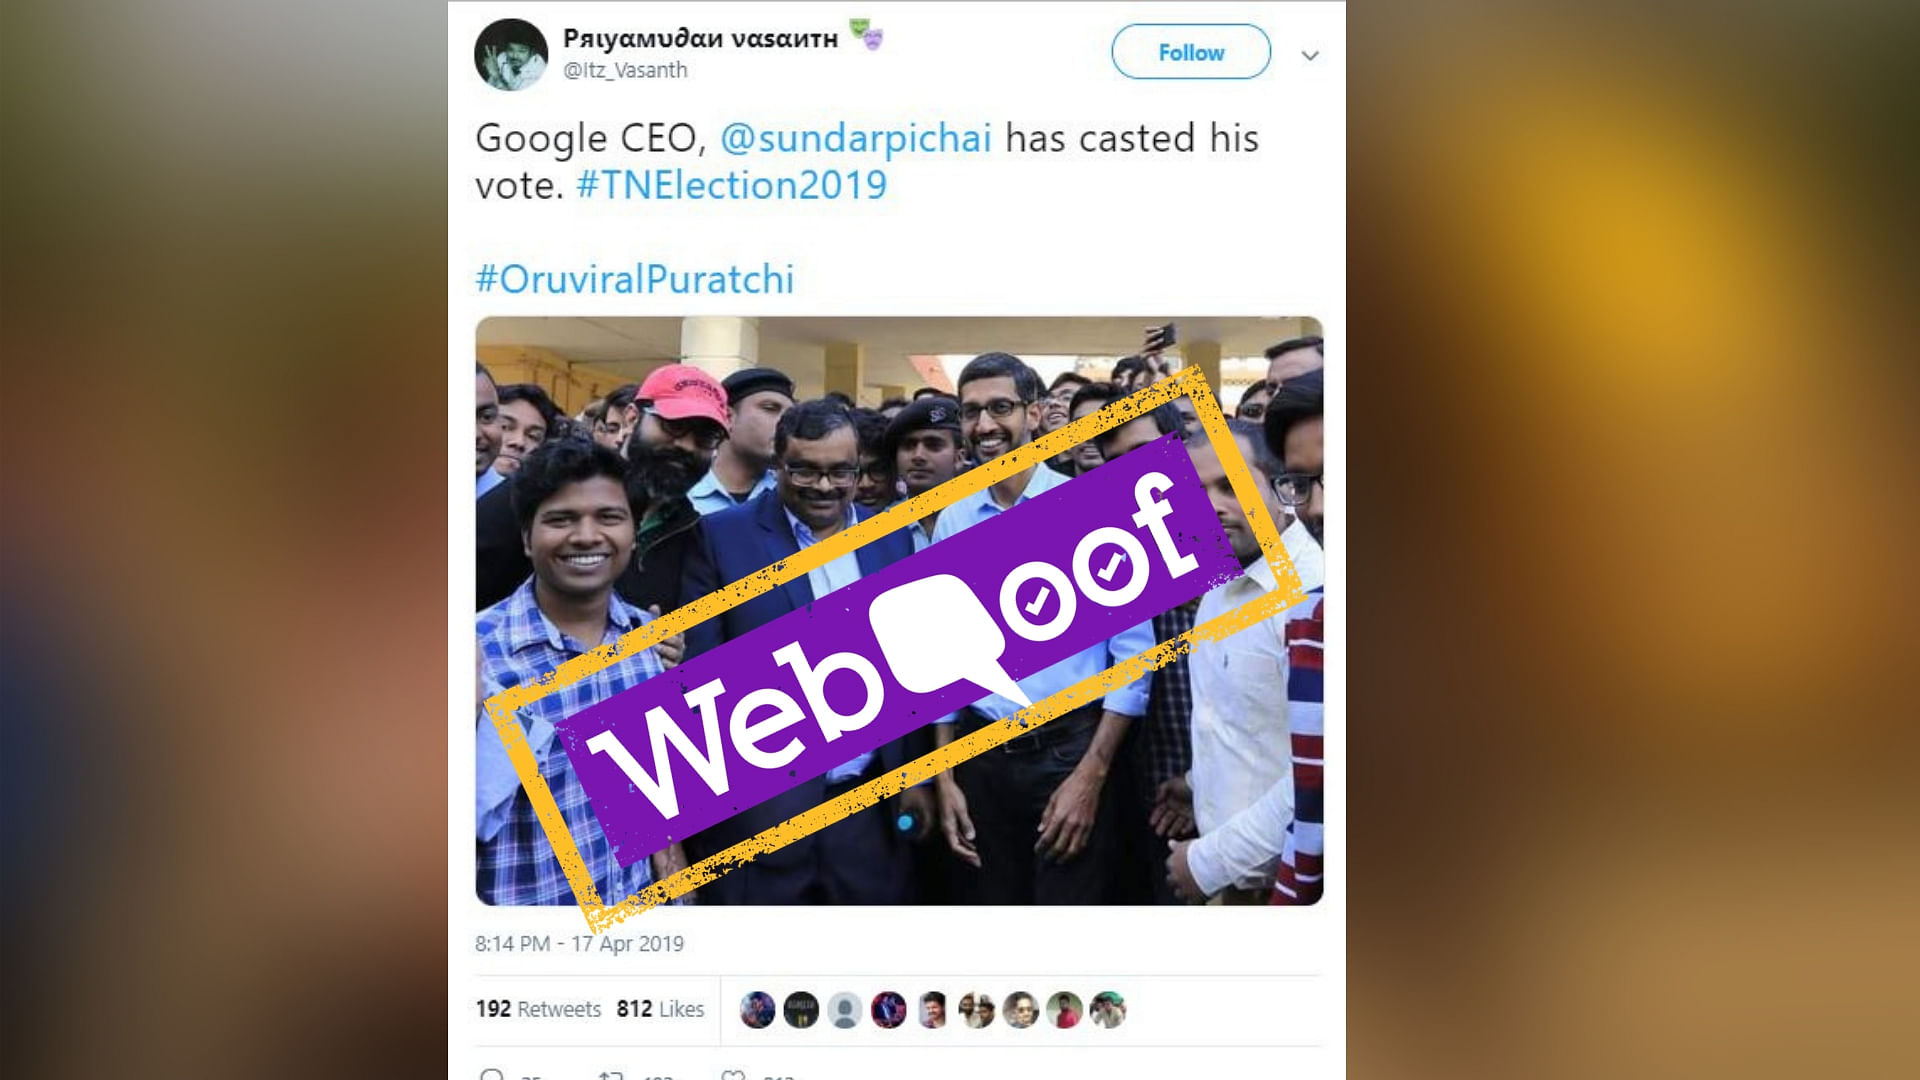 The viral post falsely claimed that Google CEO Sundar Pichai voted from Tamil Nadu.